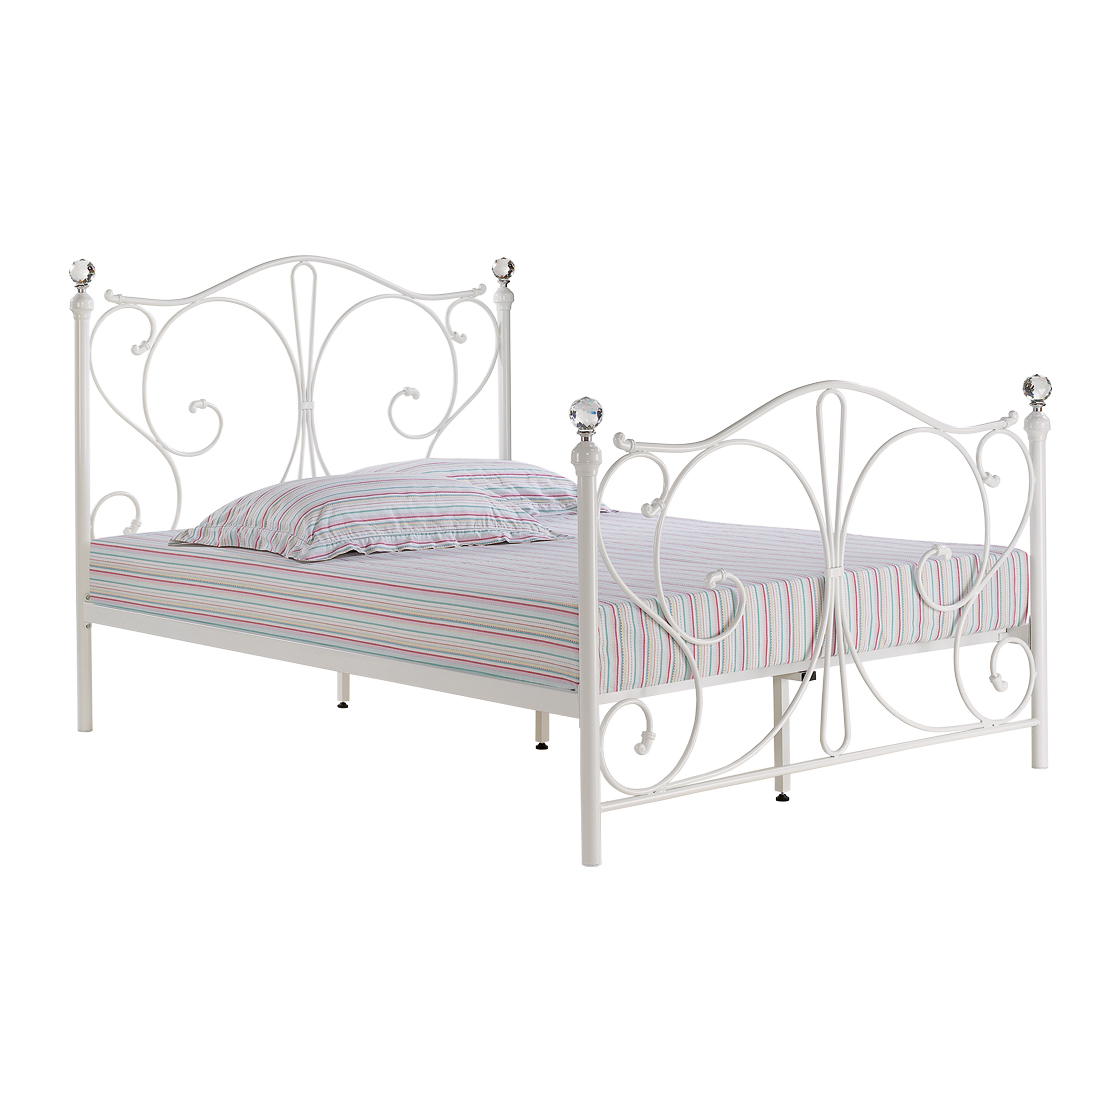 Fountain 4.6 Double Bed White